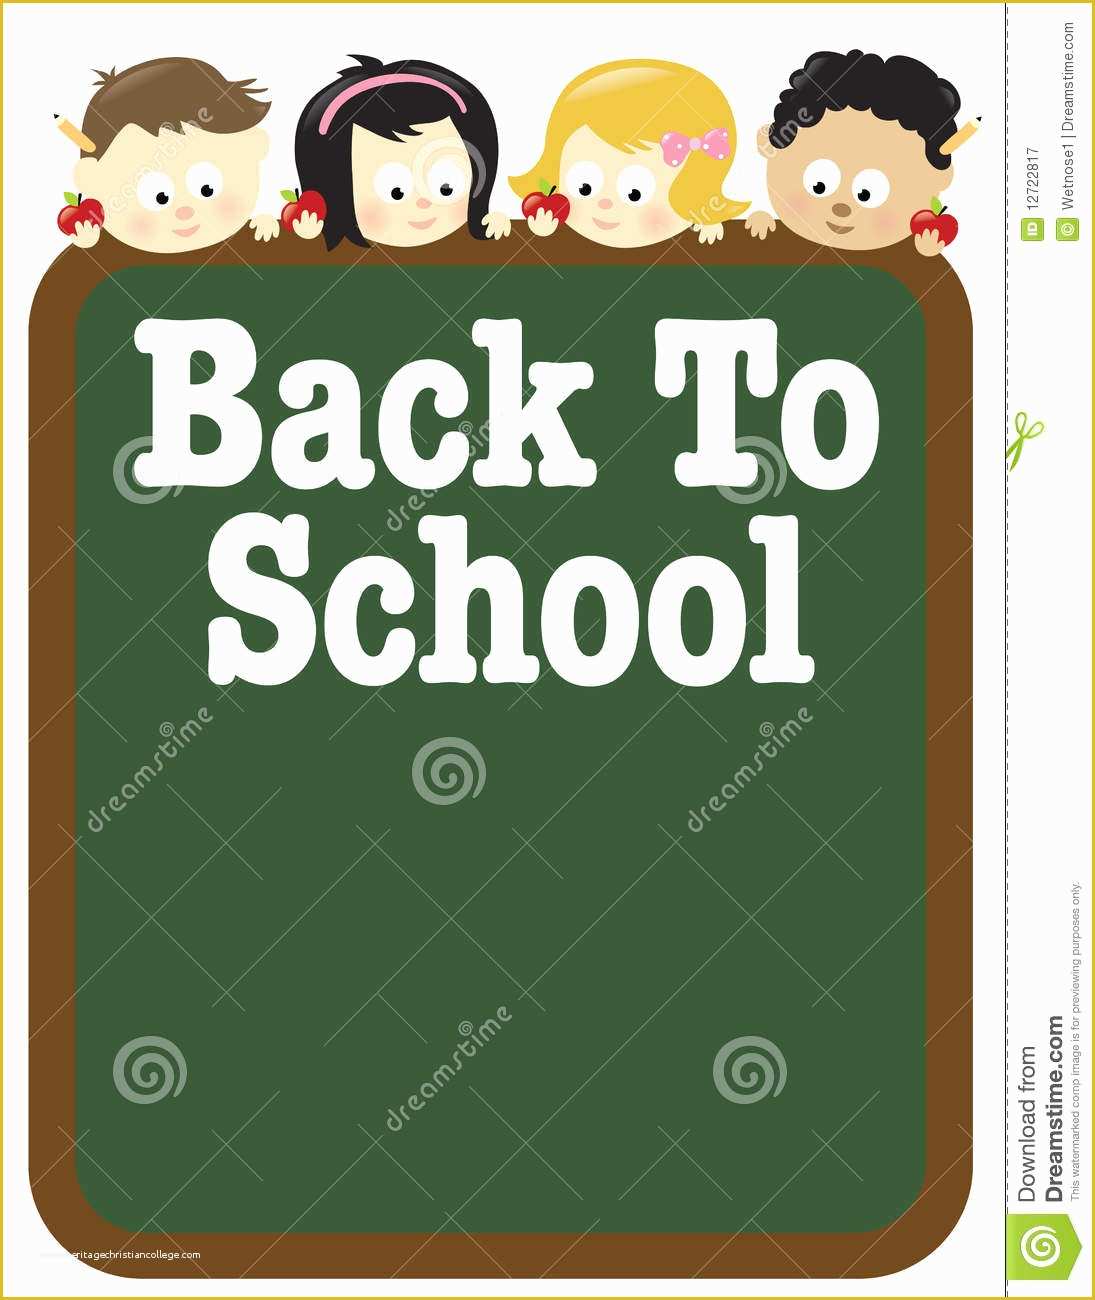 Free Back to School Flyer Template Of 8 5x11 Back to School Flyer Template Stock Vector